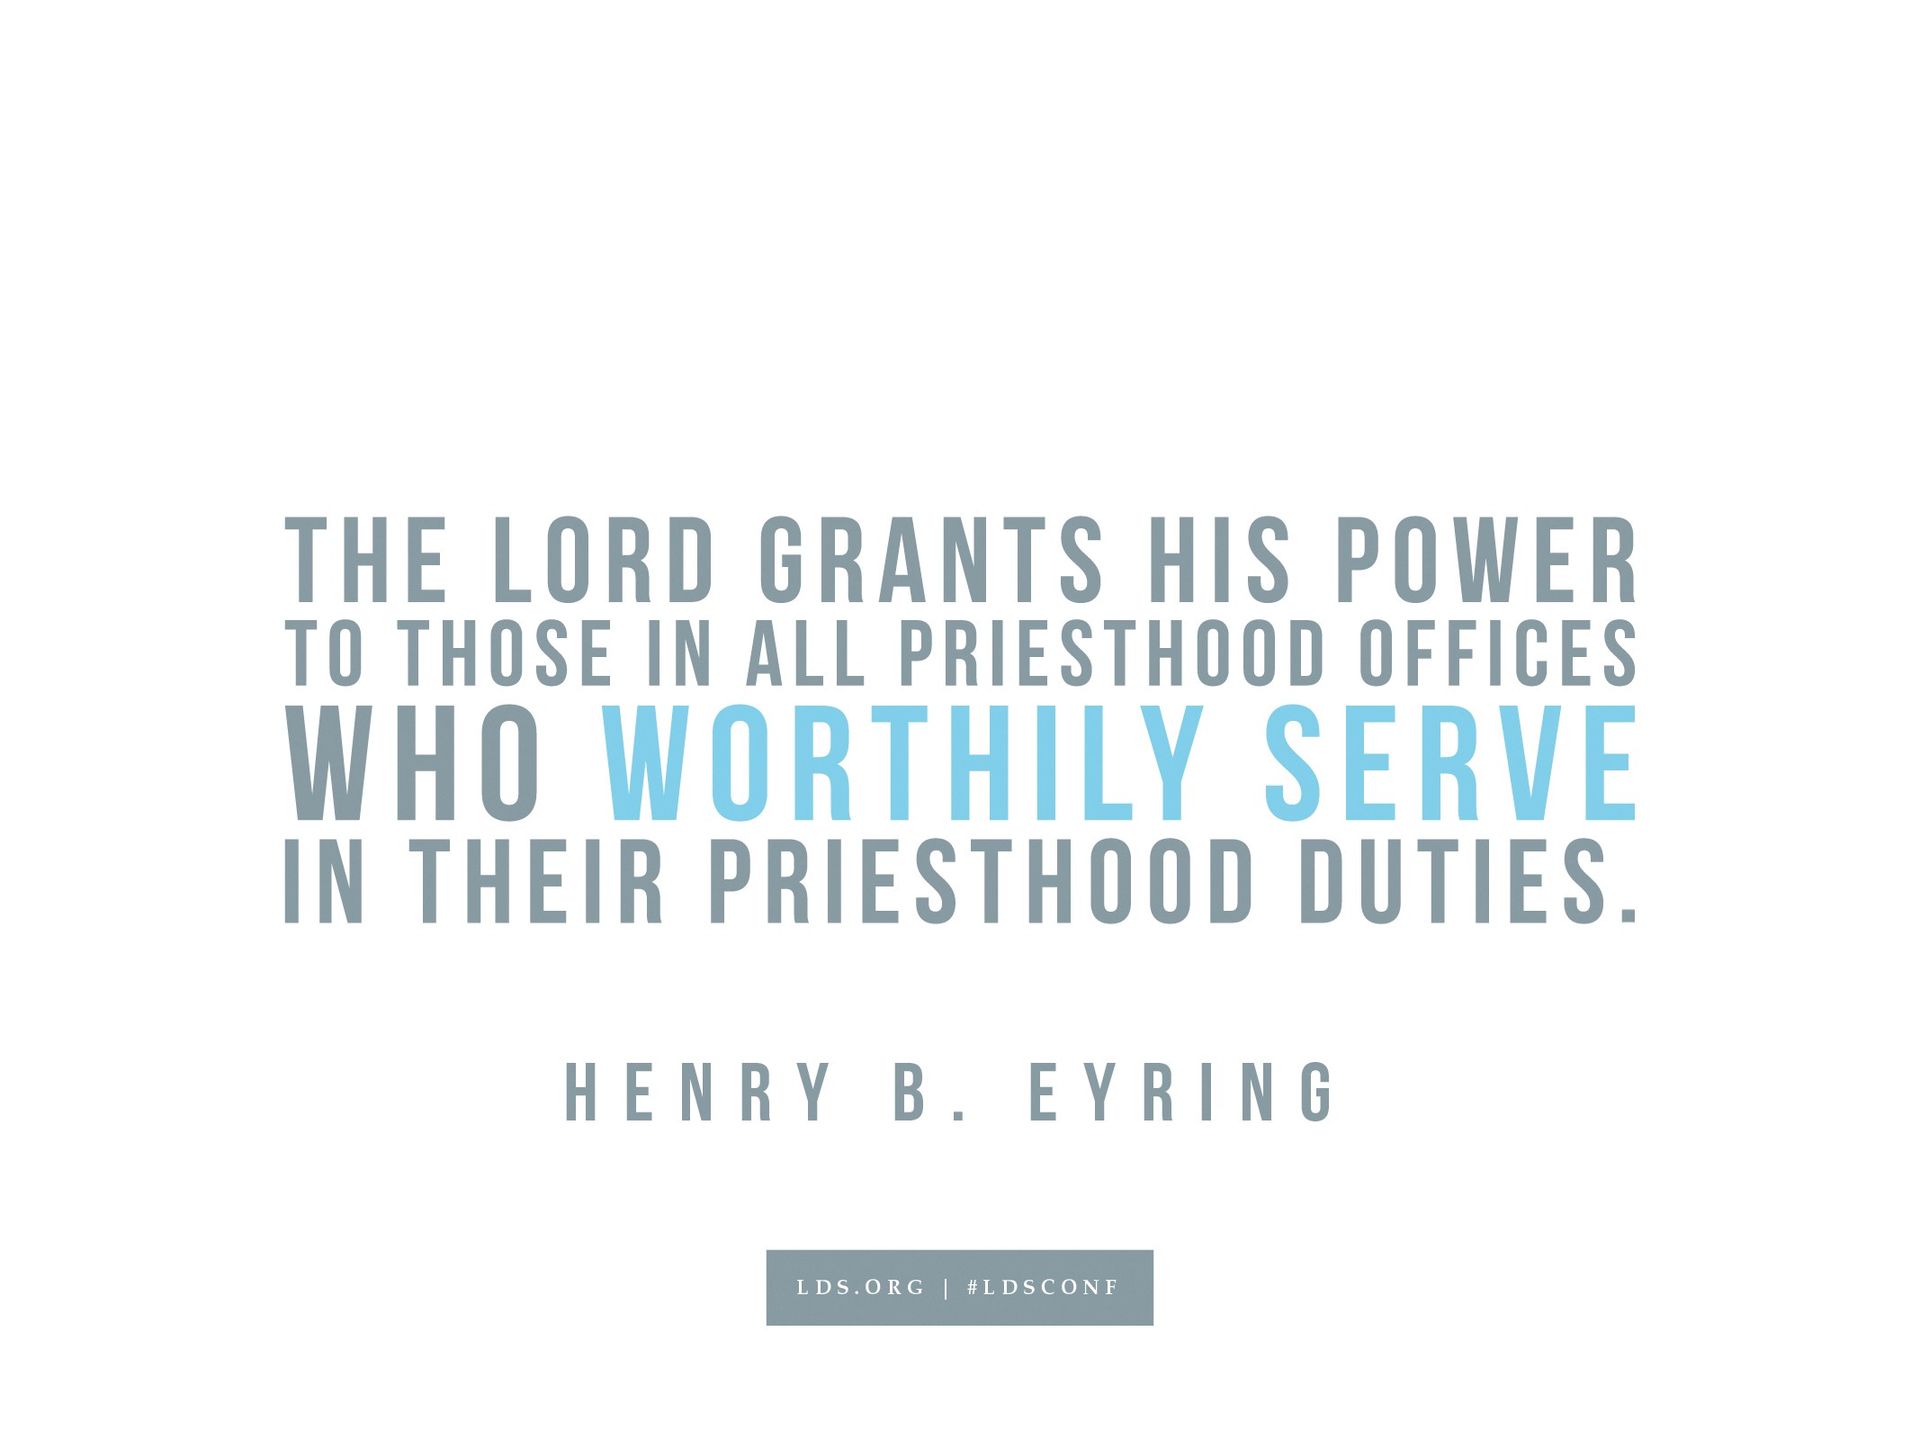 “The Lord grants His power to those in all priesthood offices who worthily serve in their priesthood duties.”—Henry B. Eyring, “That He May Become Strong Also”